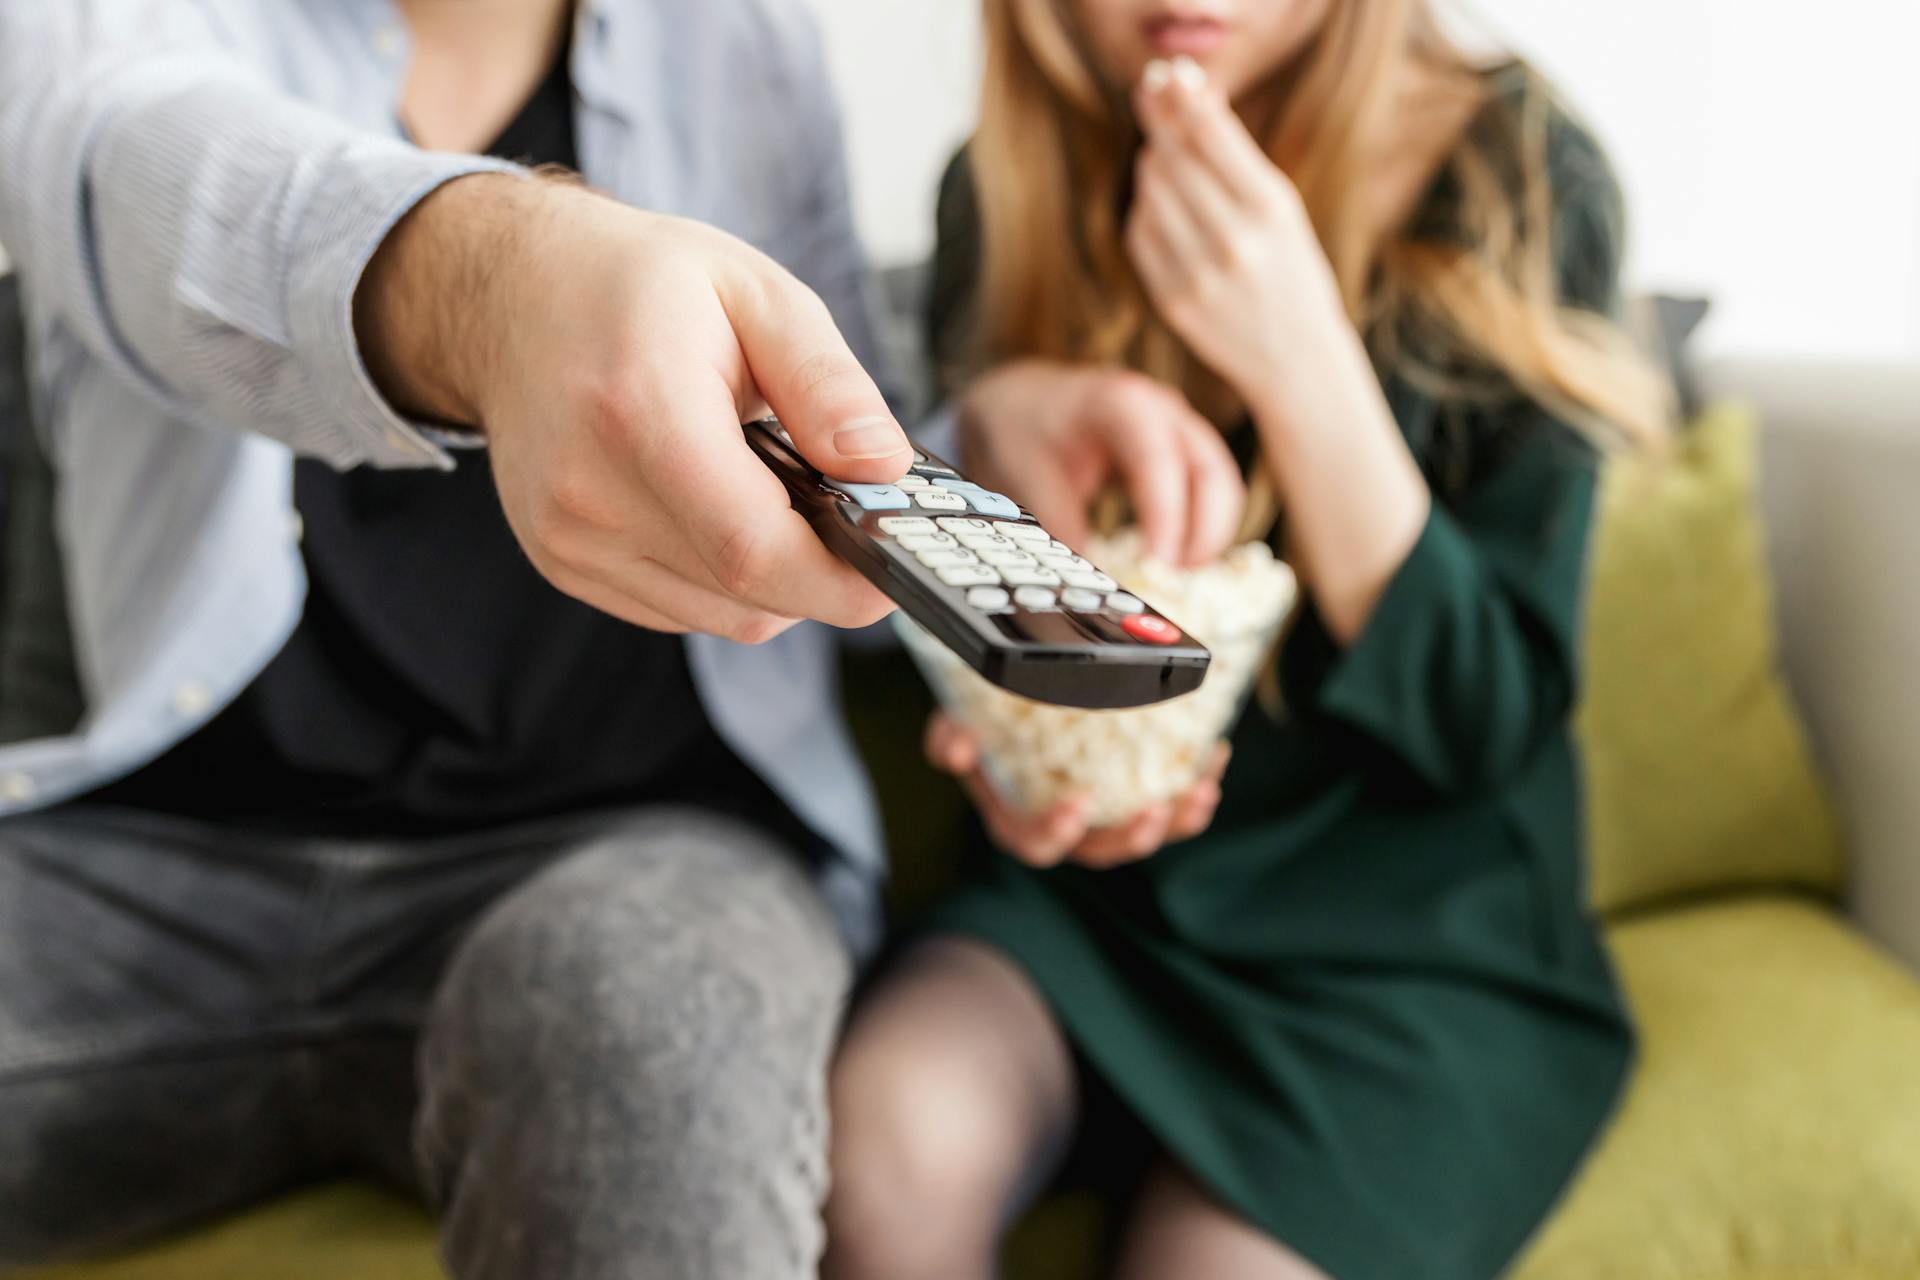 A person holding a remote control | Source: Pexels